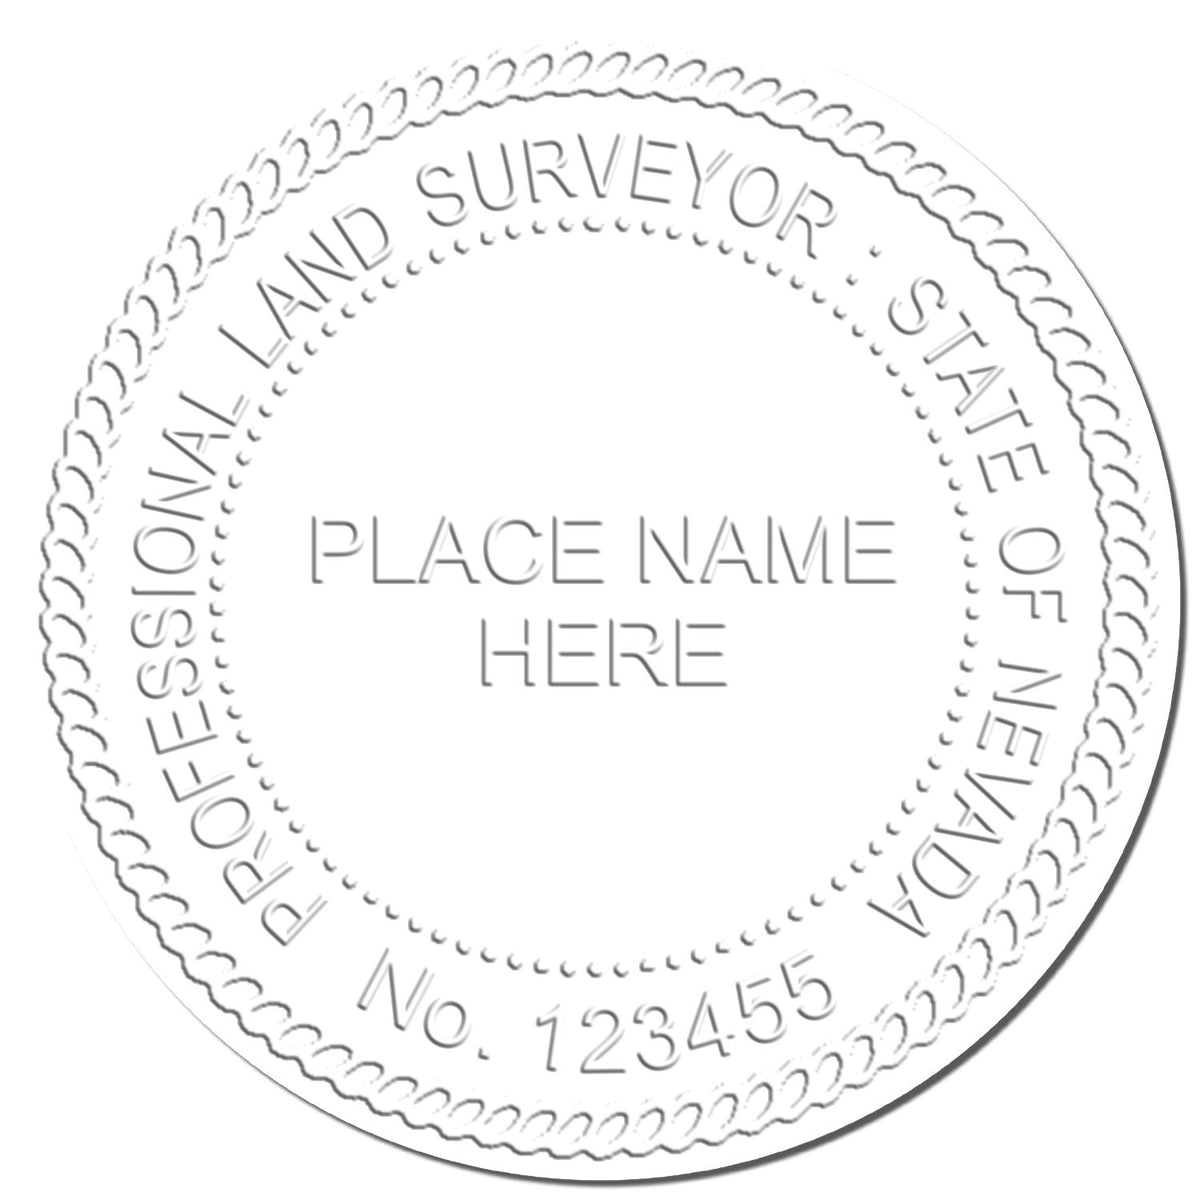 This paper is stamped with a sample imprint of the Heavy Duty Cast Iron Nevada Land Surveyor Seal Embosser, signifying its quality and reliability.